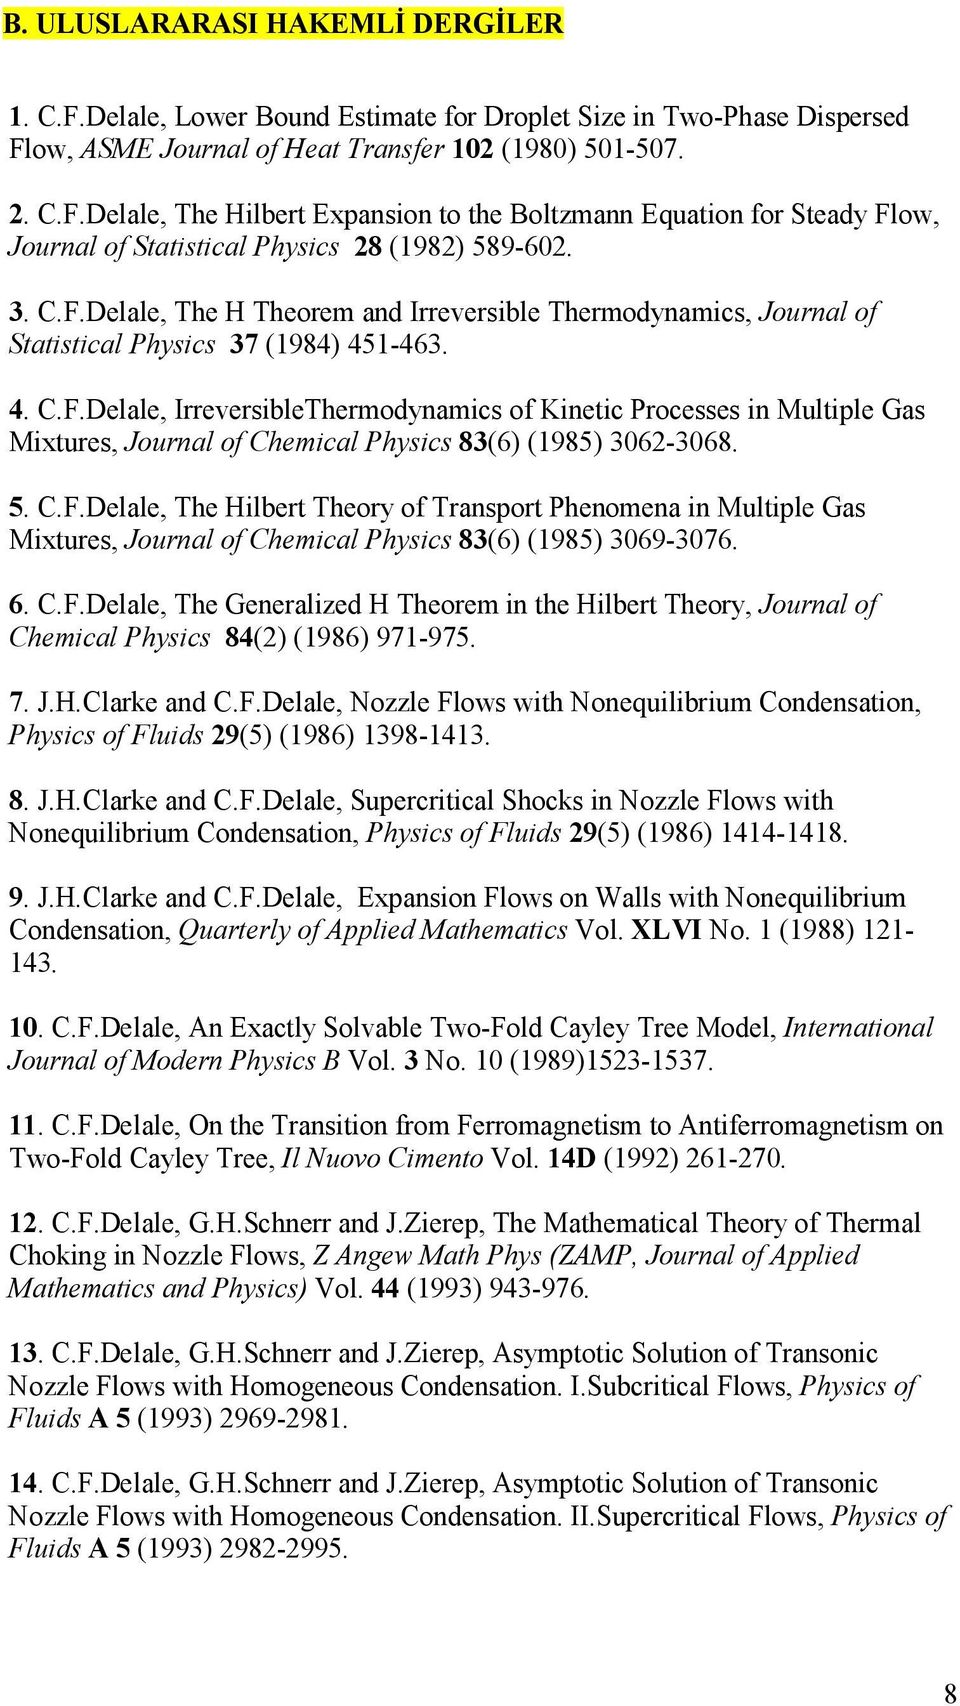 5. C.F.Delale, The Hilbert Theory of Transport Phenomena in Multiple Gas Mixtures, Journal of Chemical Physics 83(6) (1985) 3069-3076. 6. C.F.Delale, The Generalized H Theorem in the Hilbert Theory, Journal of Chemical Physics 84(2) (1986) 971-975.